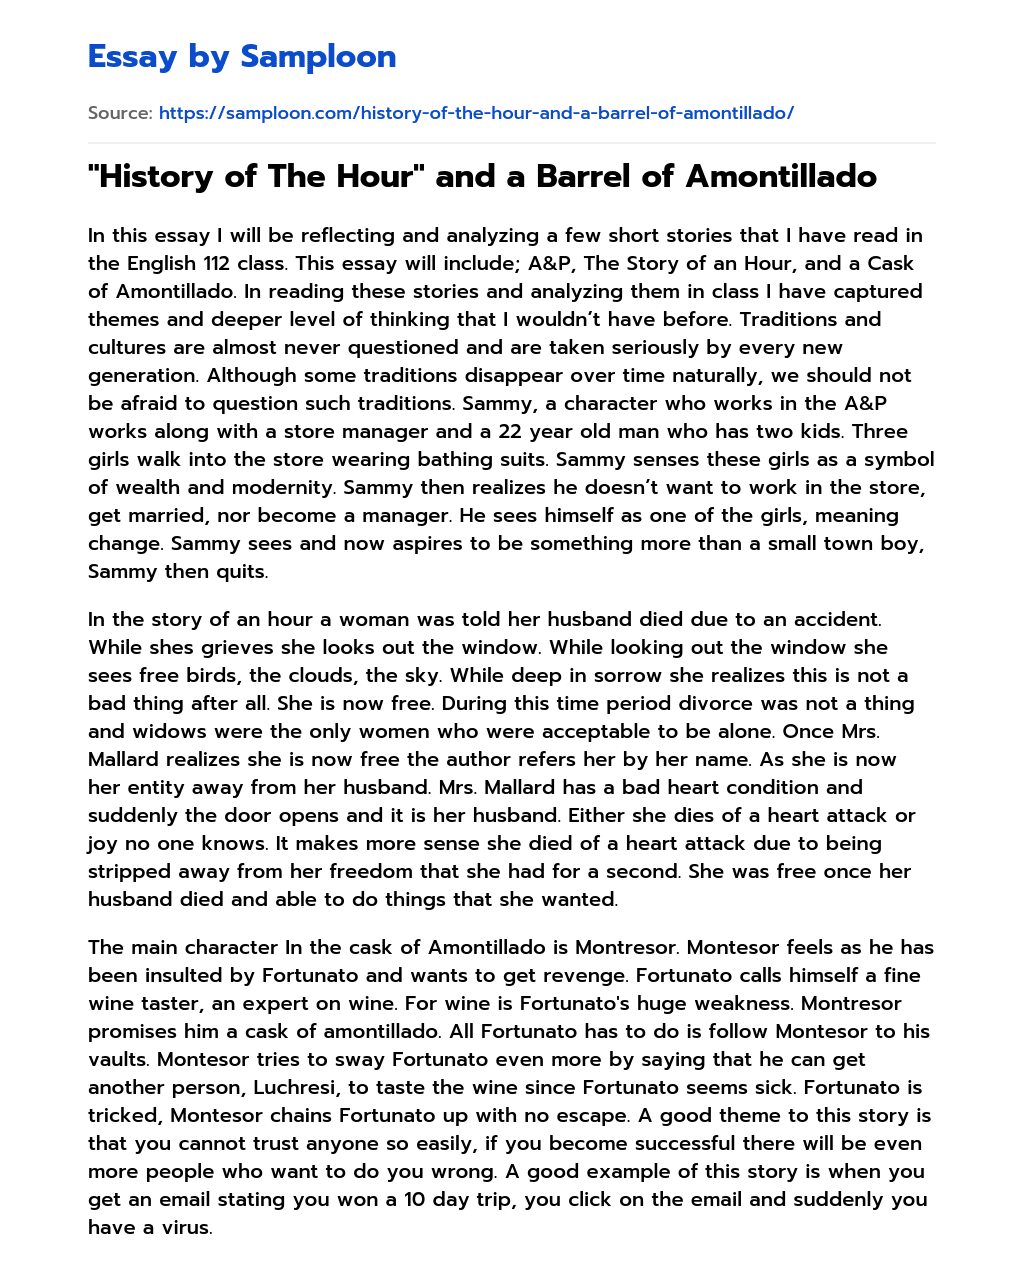 “History of The Hour” and a Barrel of Amontillado essay